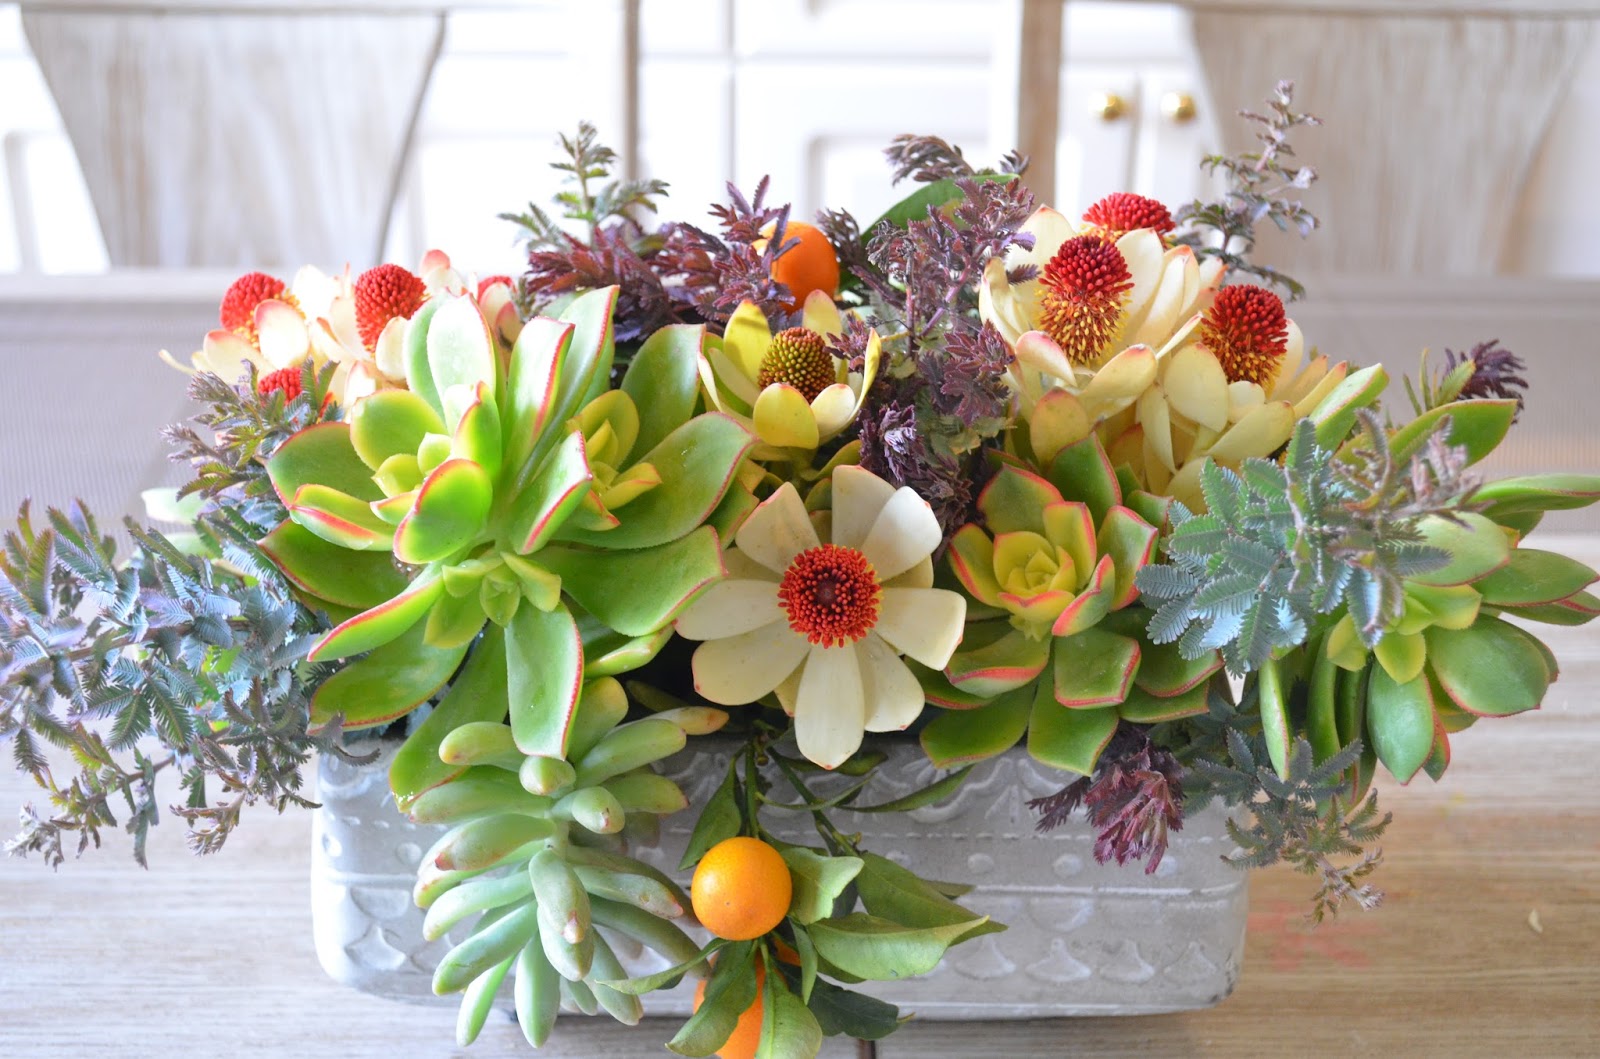 images of flowers on kitchen table